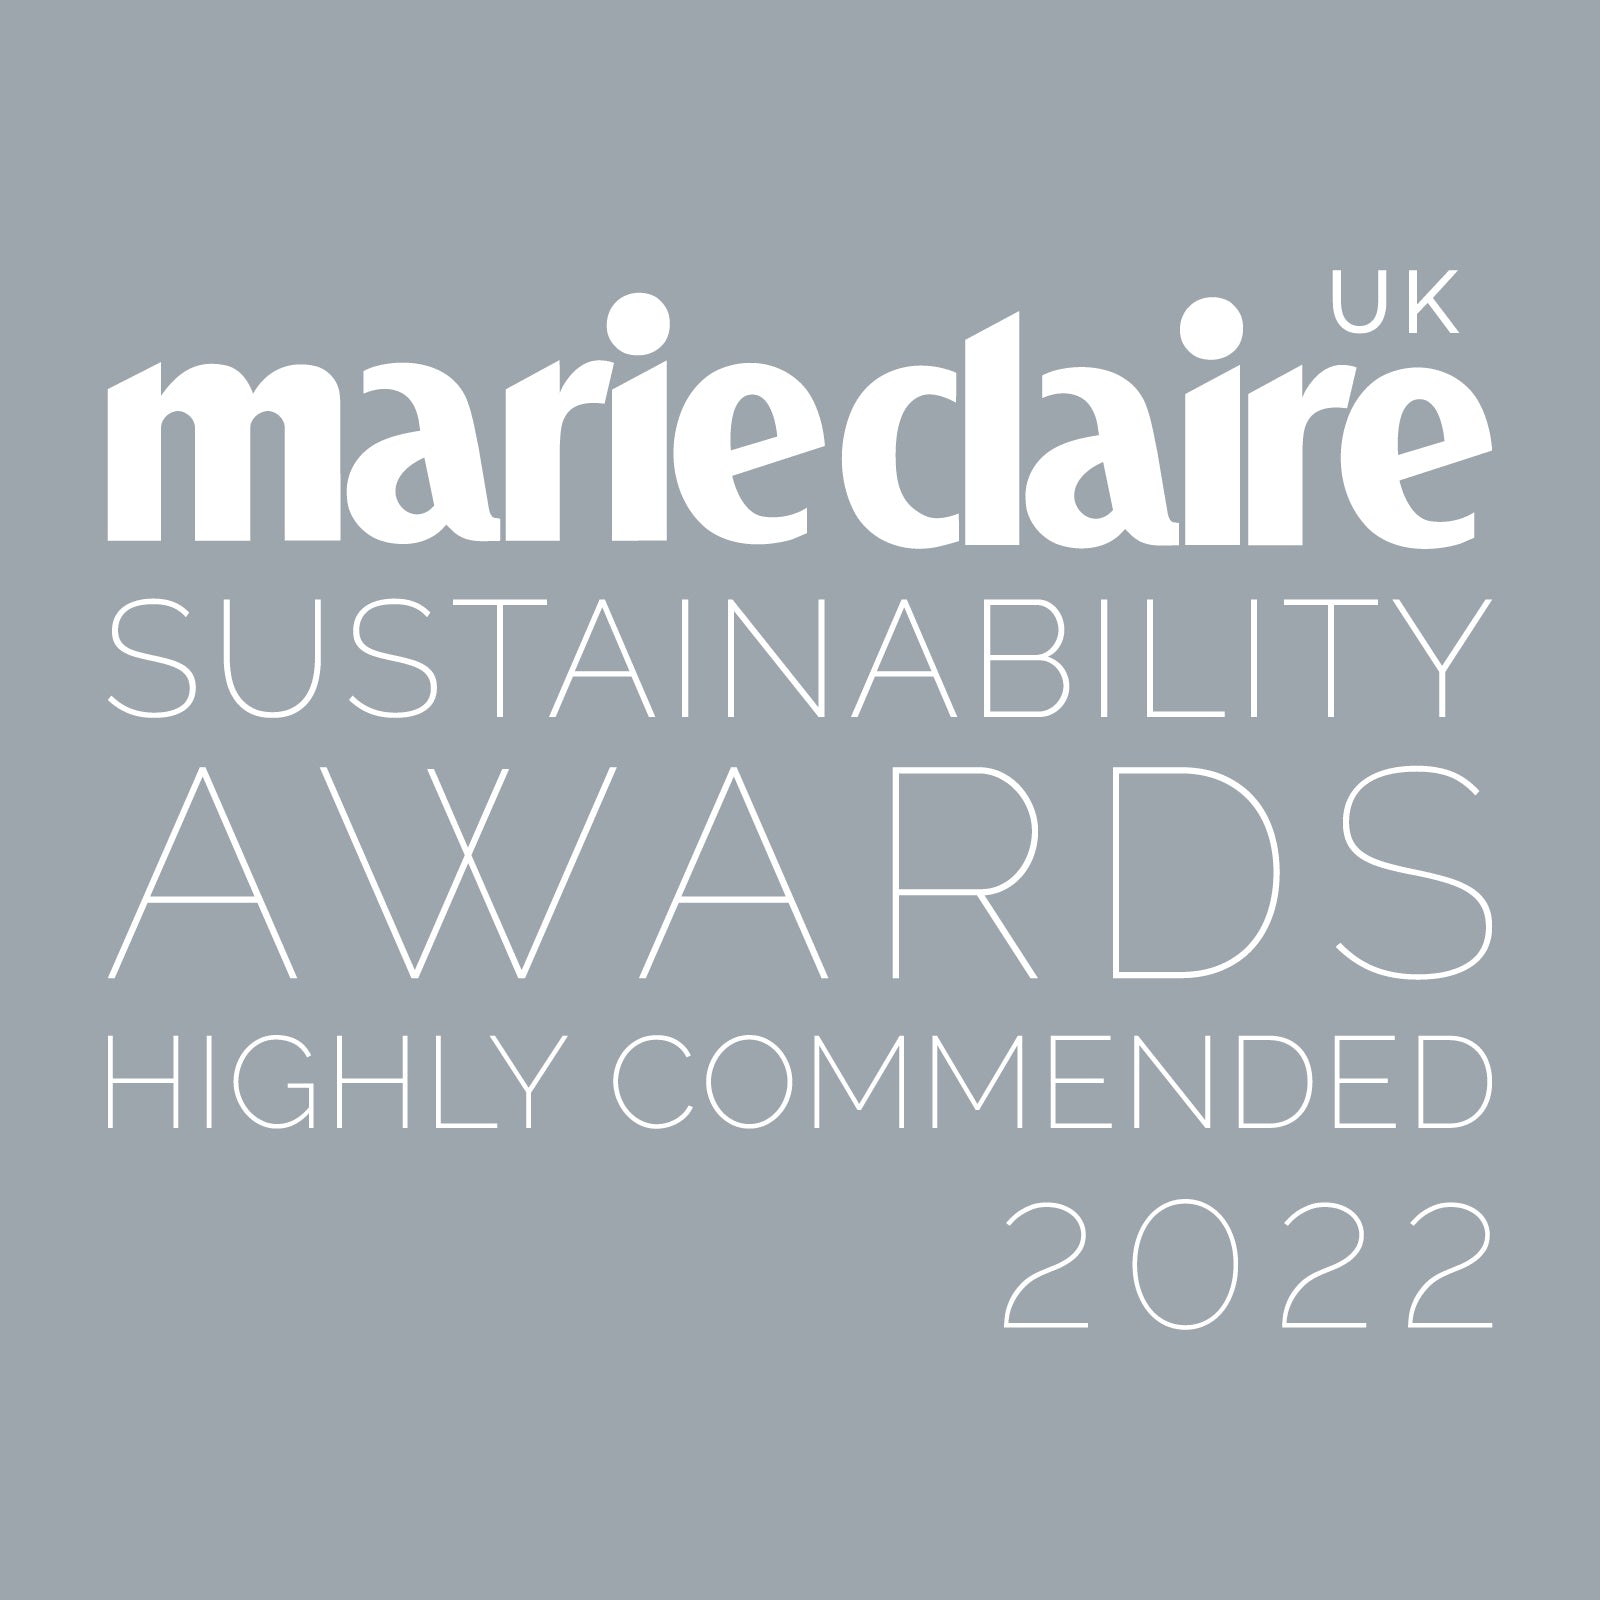 Project Harmless was Highly Commended at the Marie Claire Sustainability Awards 2022